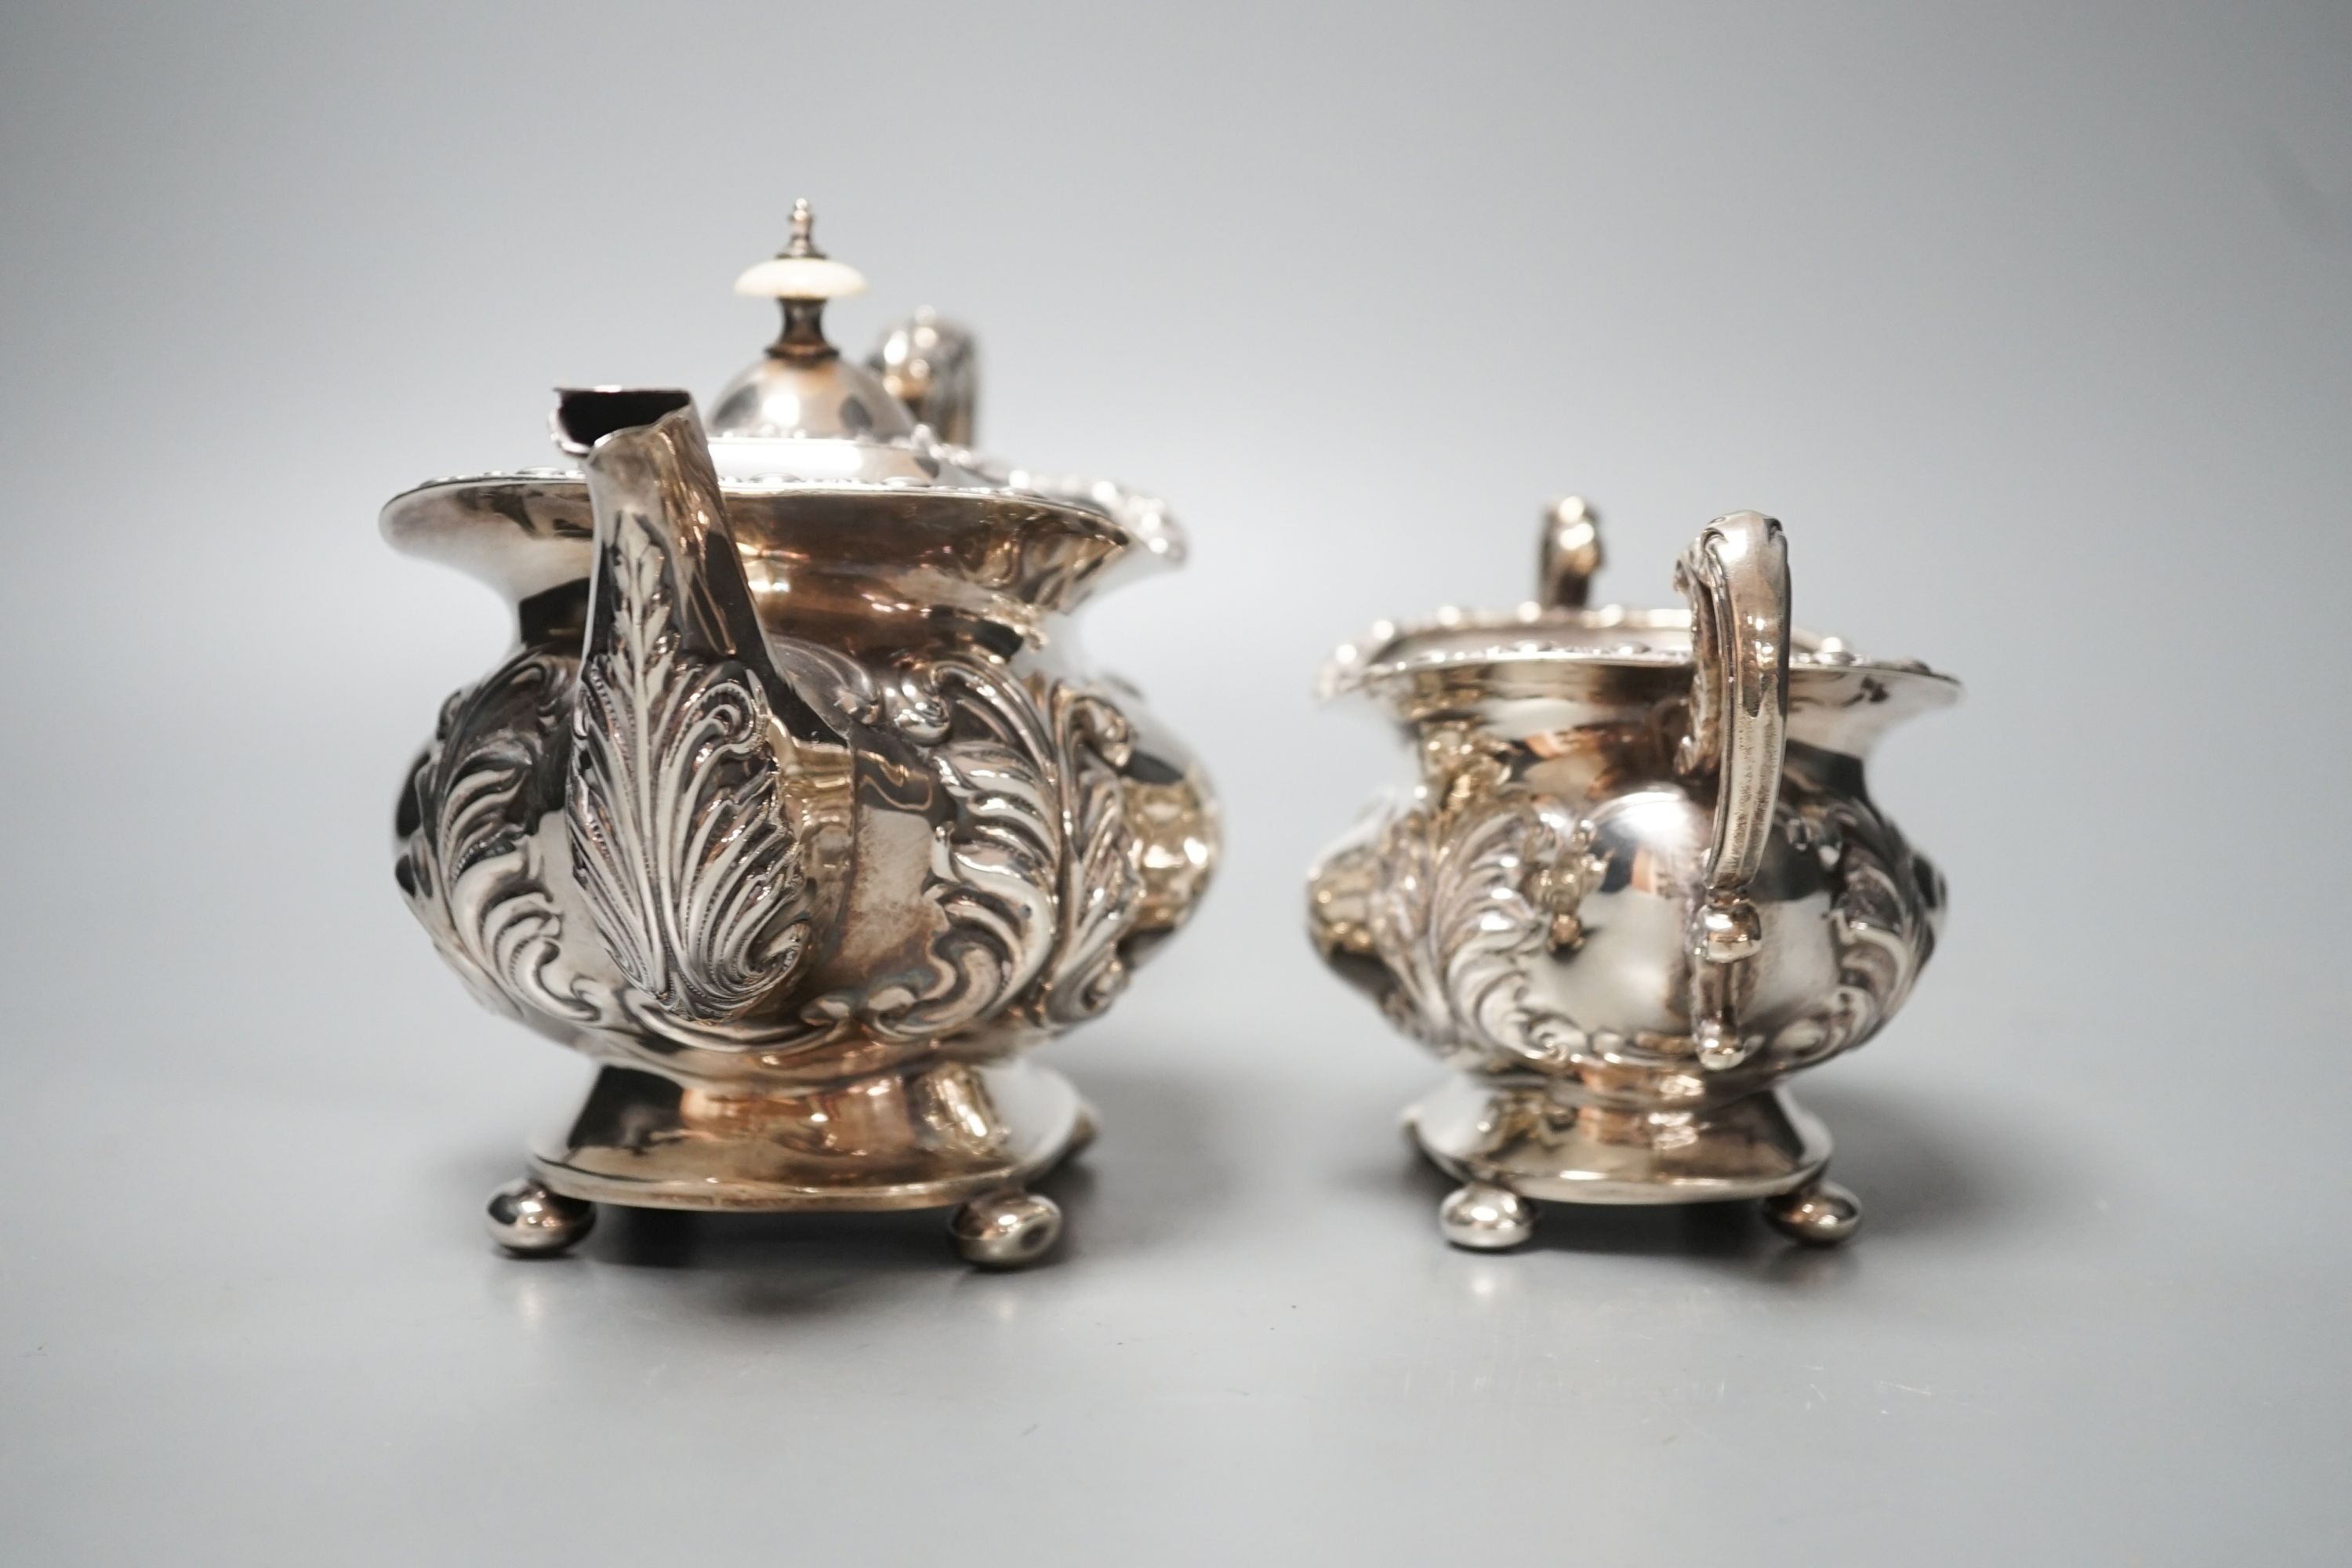 An Edwardian embossed silver teapot and matching sugar bowl, William Aitken, Chester, 1903, gross 21.5oz.